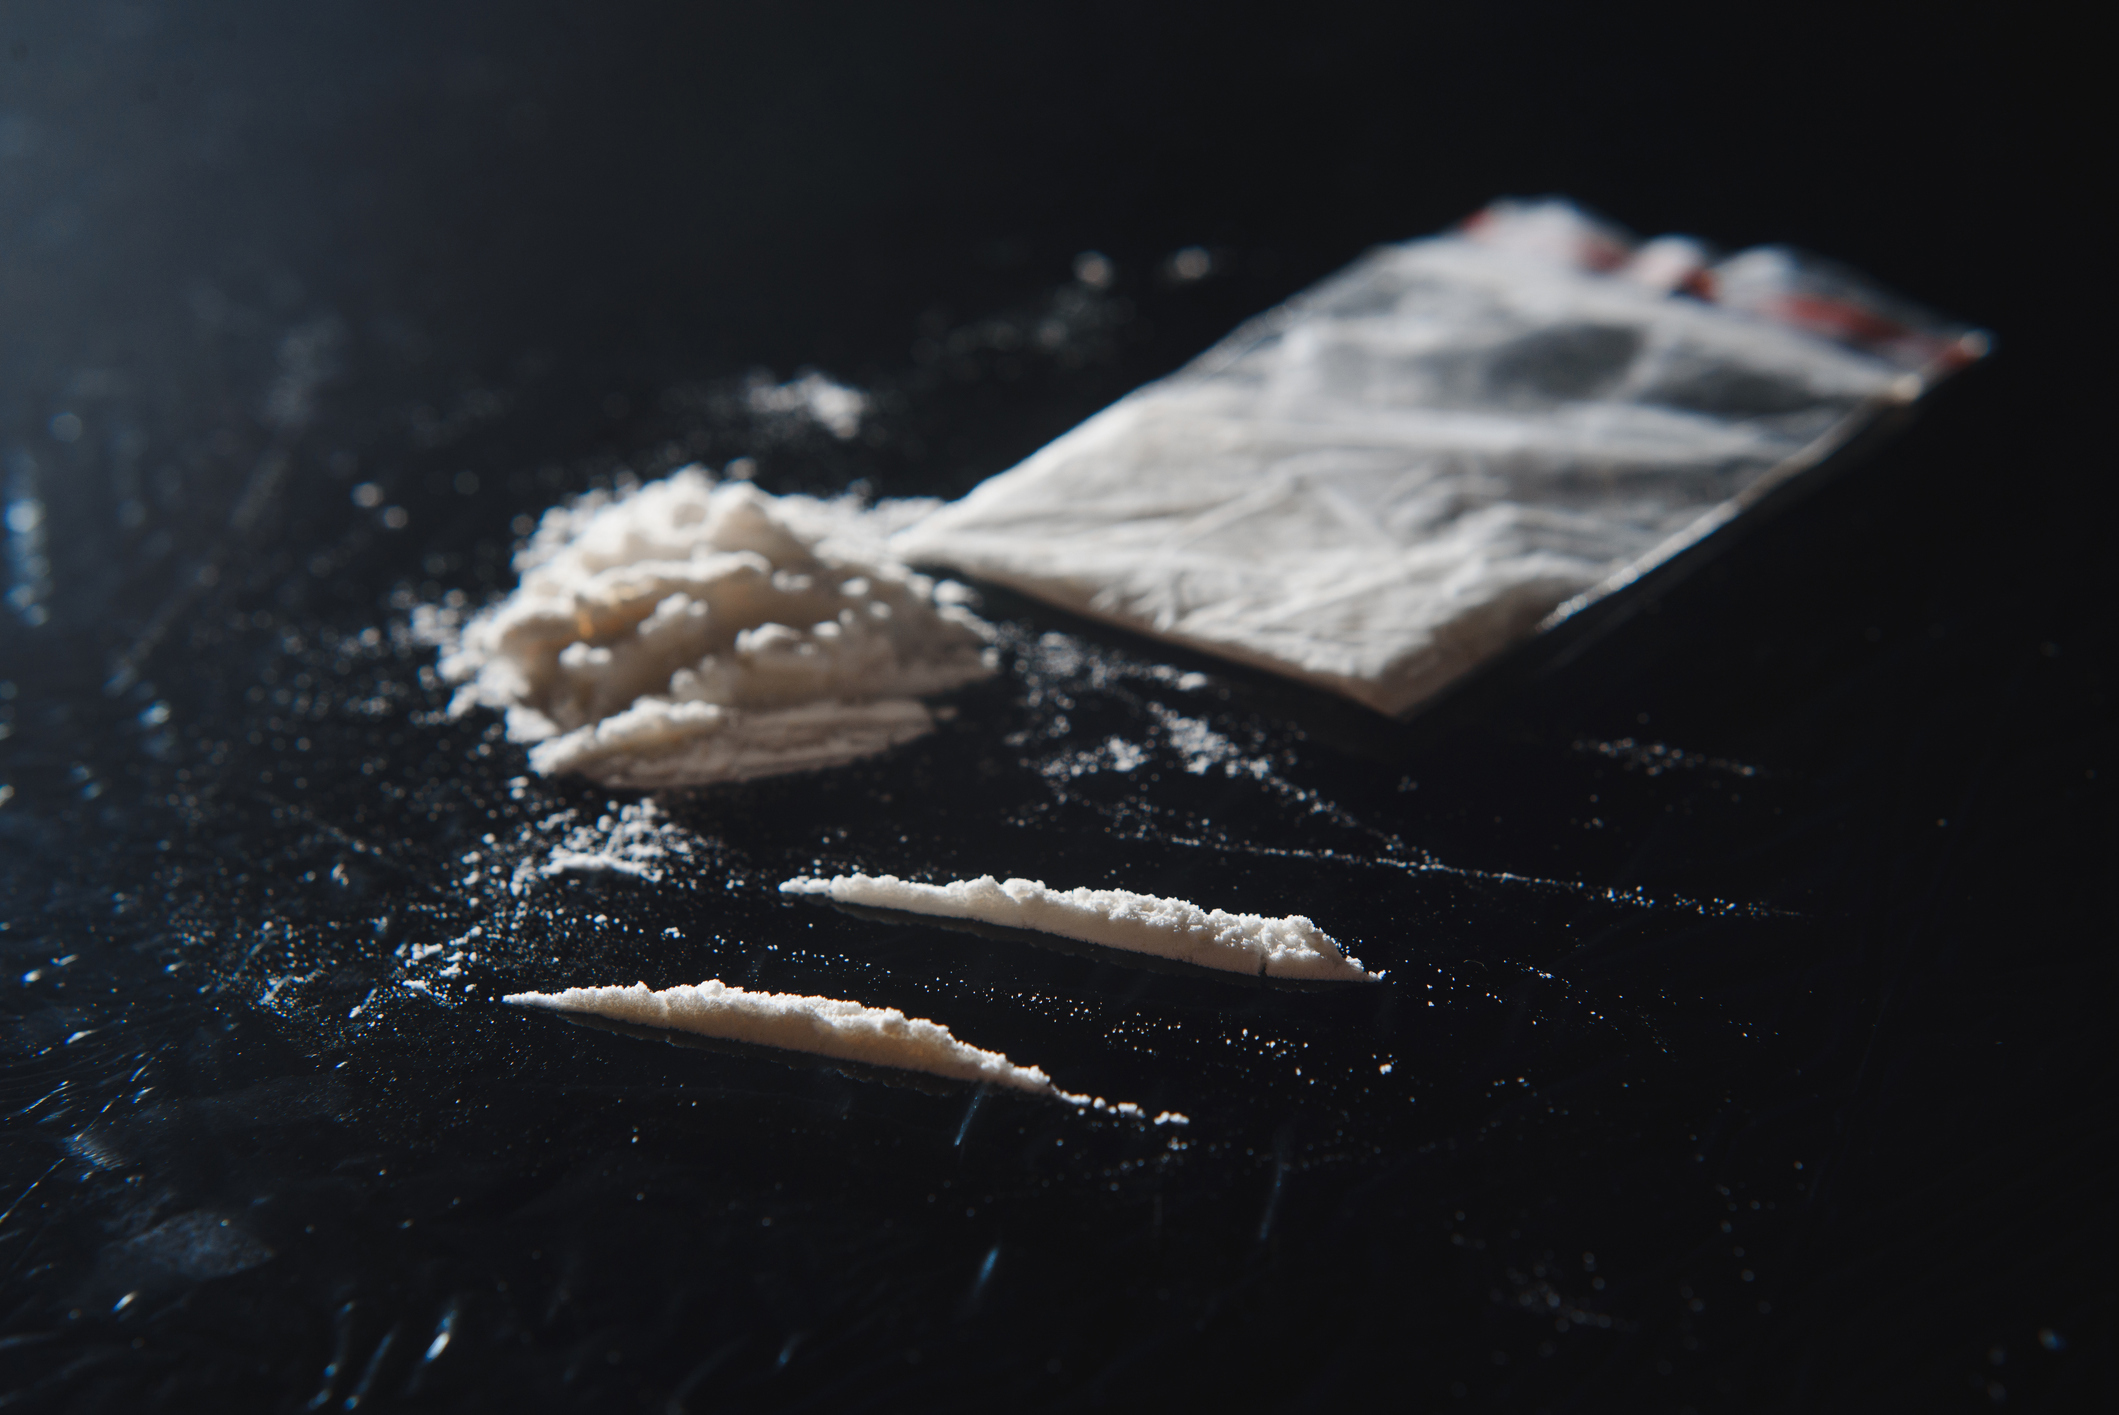 Warning over 'extremely potent' drug being sold on streets as cocaine